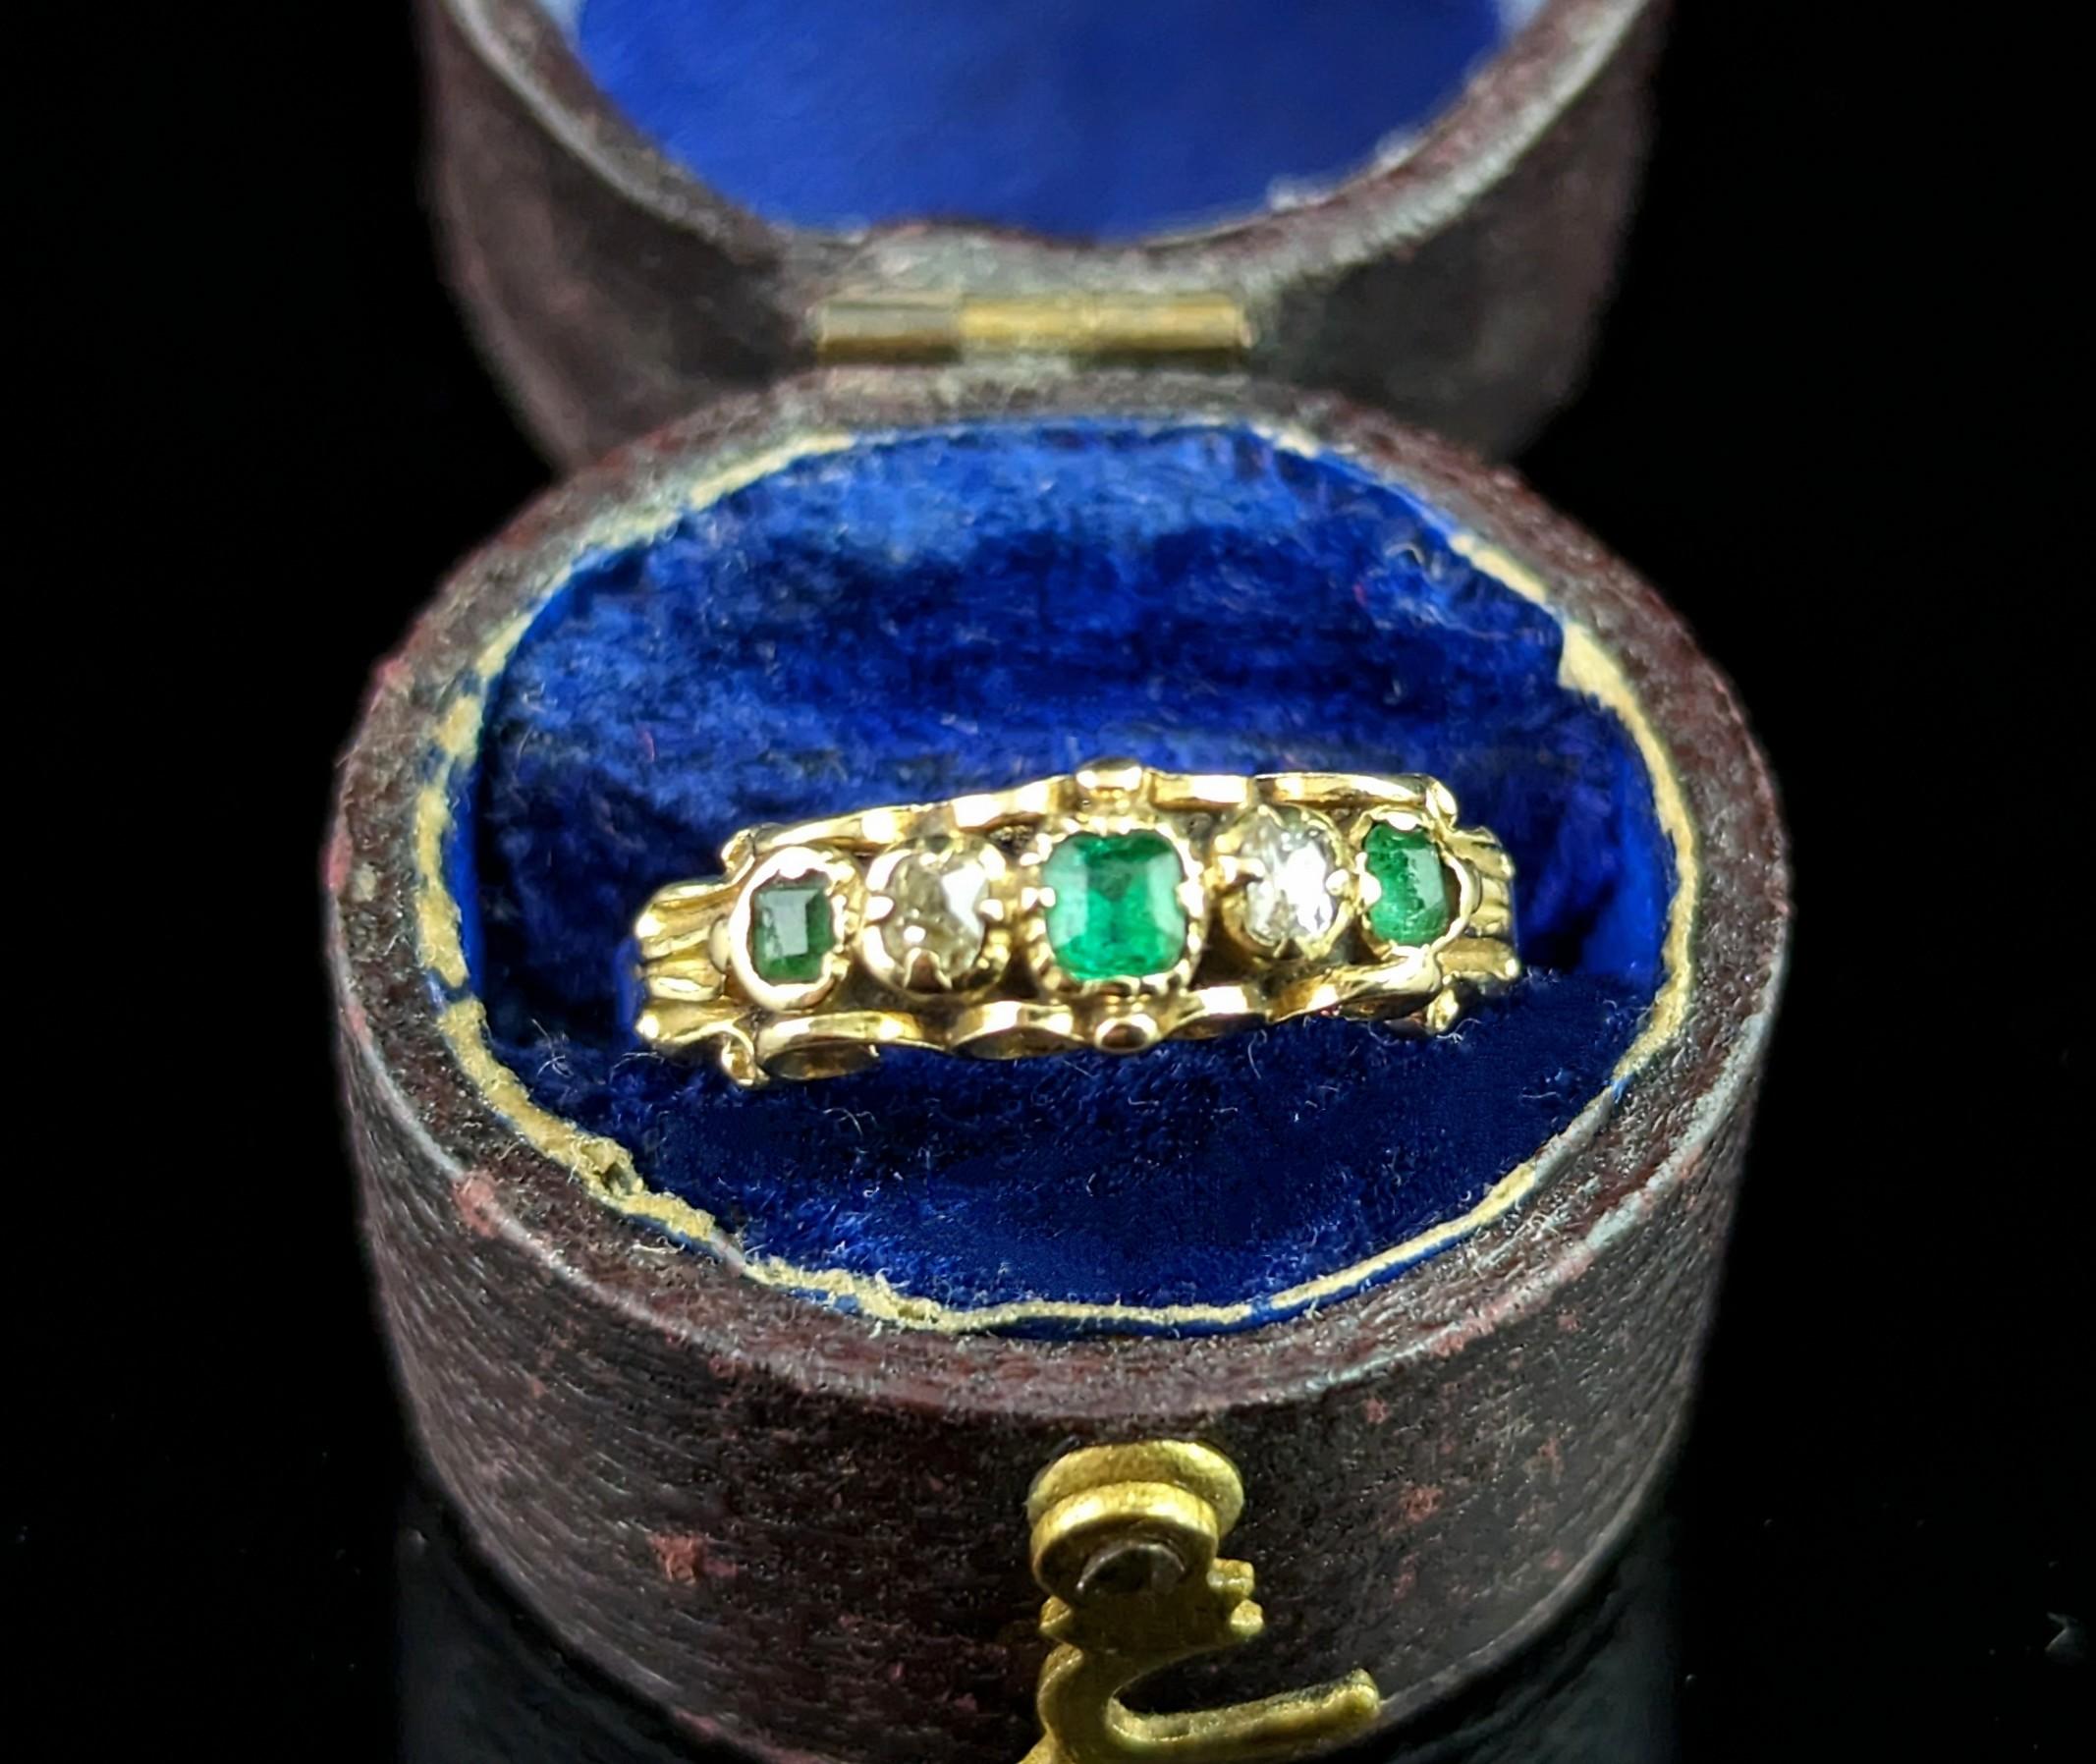 This antique Emerald and Diamond ring exudes Victorian luxury.

It is an early Victorian piece crafted in rich 18ct yellow gold, set to the face with a row of gems, three emeralds and two old cut diamonds.

The setting has beautiful scrollwork top